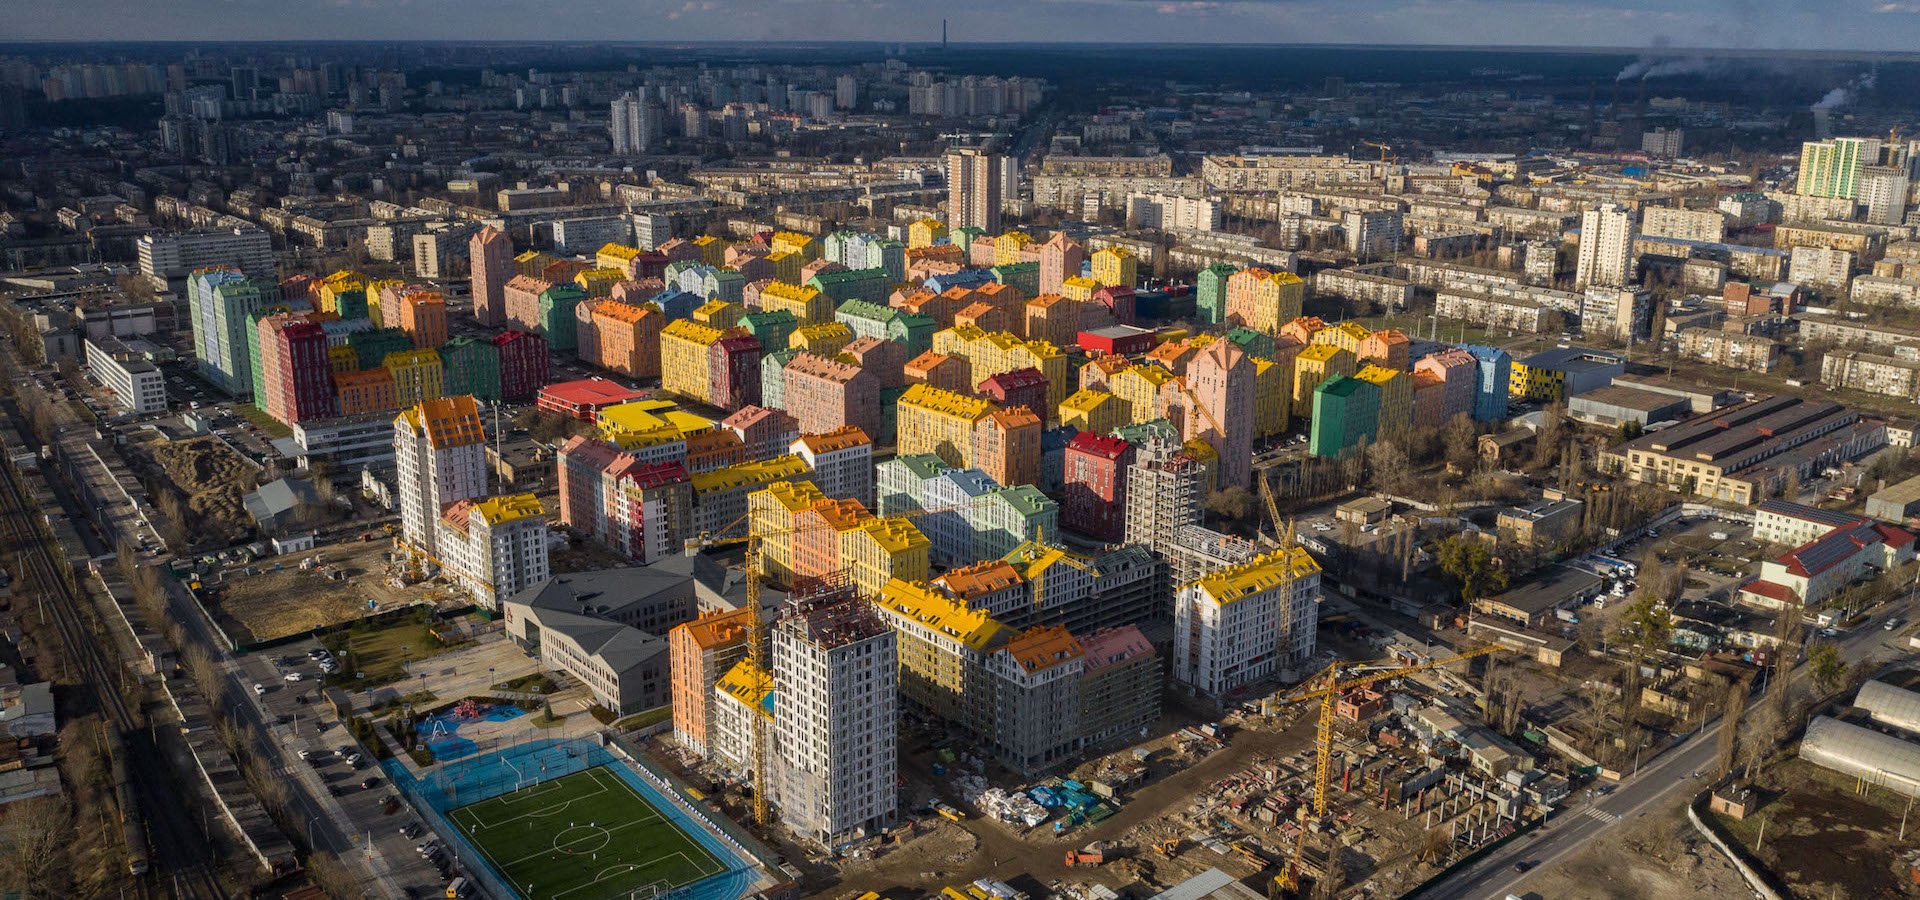 Gold at the end of the rainbow: Kyiv’s colourful housing wins at the World Architecture Festival